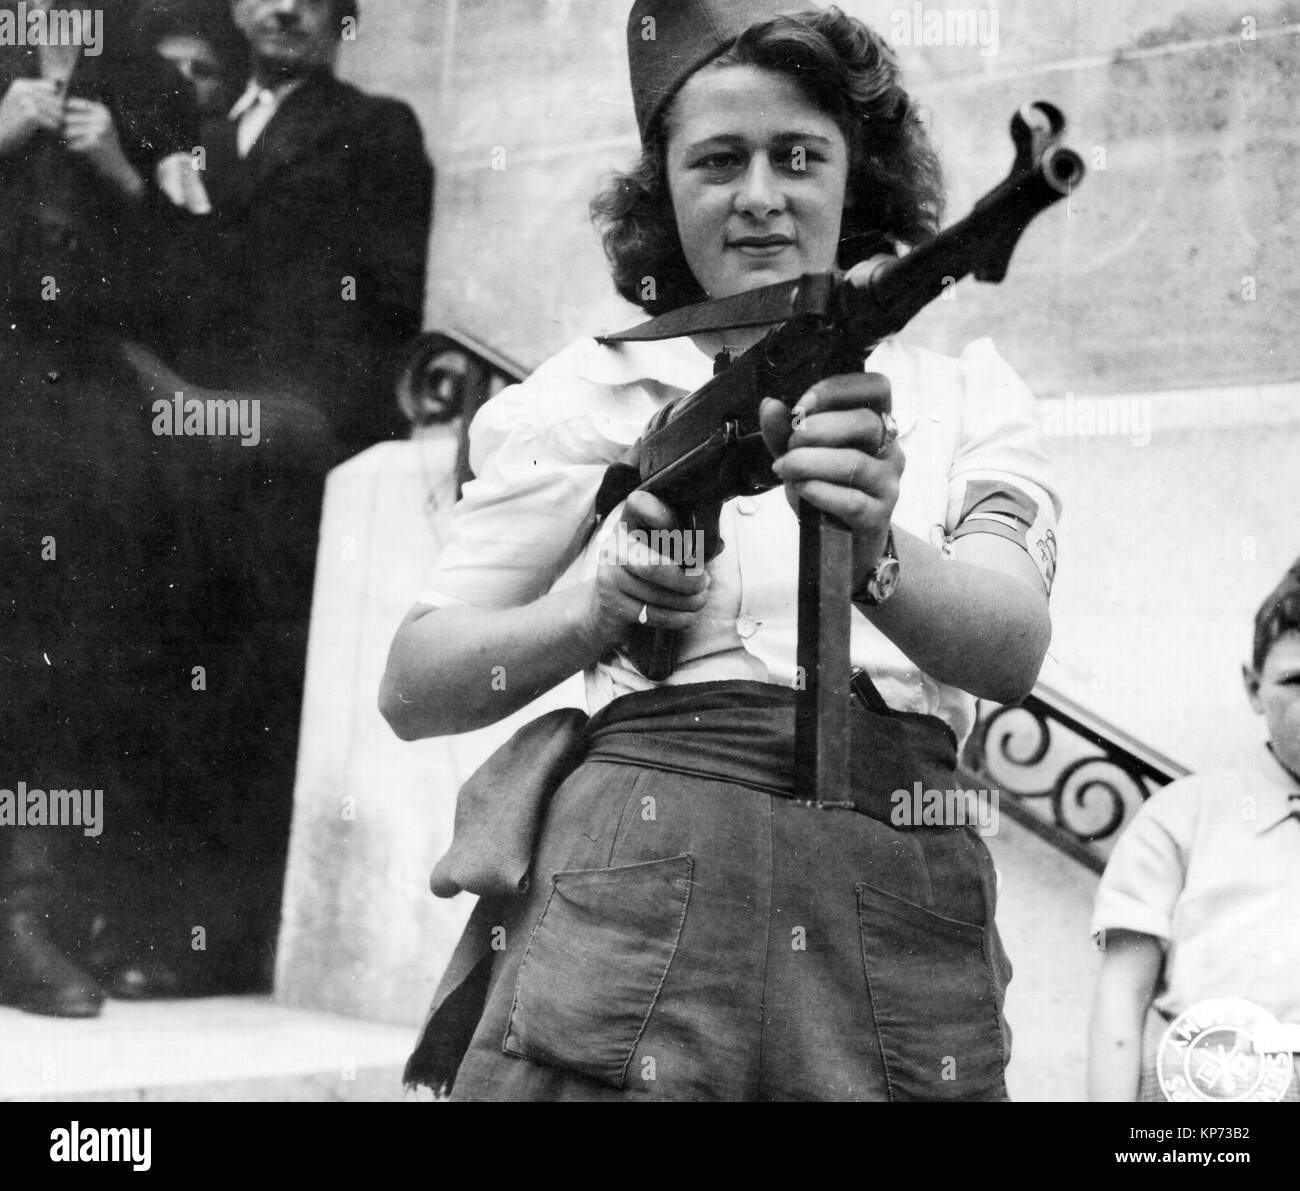 Aug 23, 1945 Nicole a French Partisan Who Captured 25 Nazis in the Chartres Area, in Addition to Liquidating Others, Poses with the Automatic Rifle Stock Photo